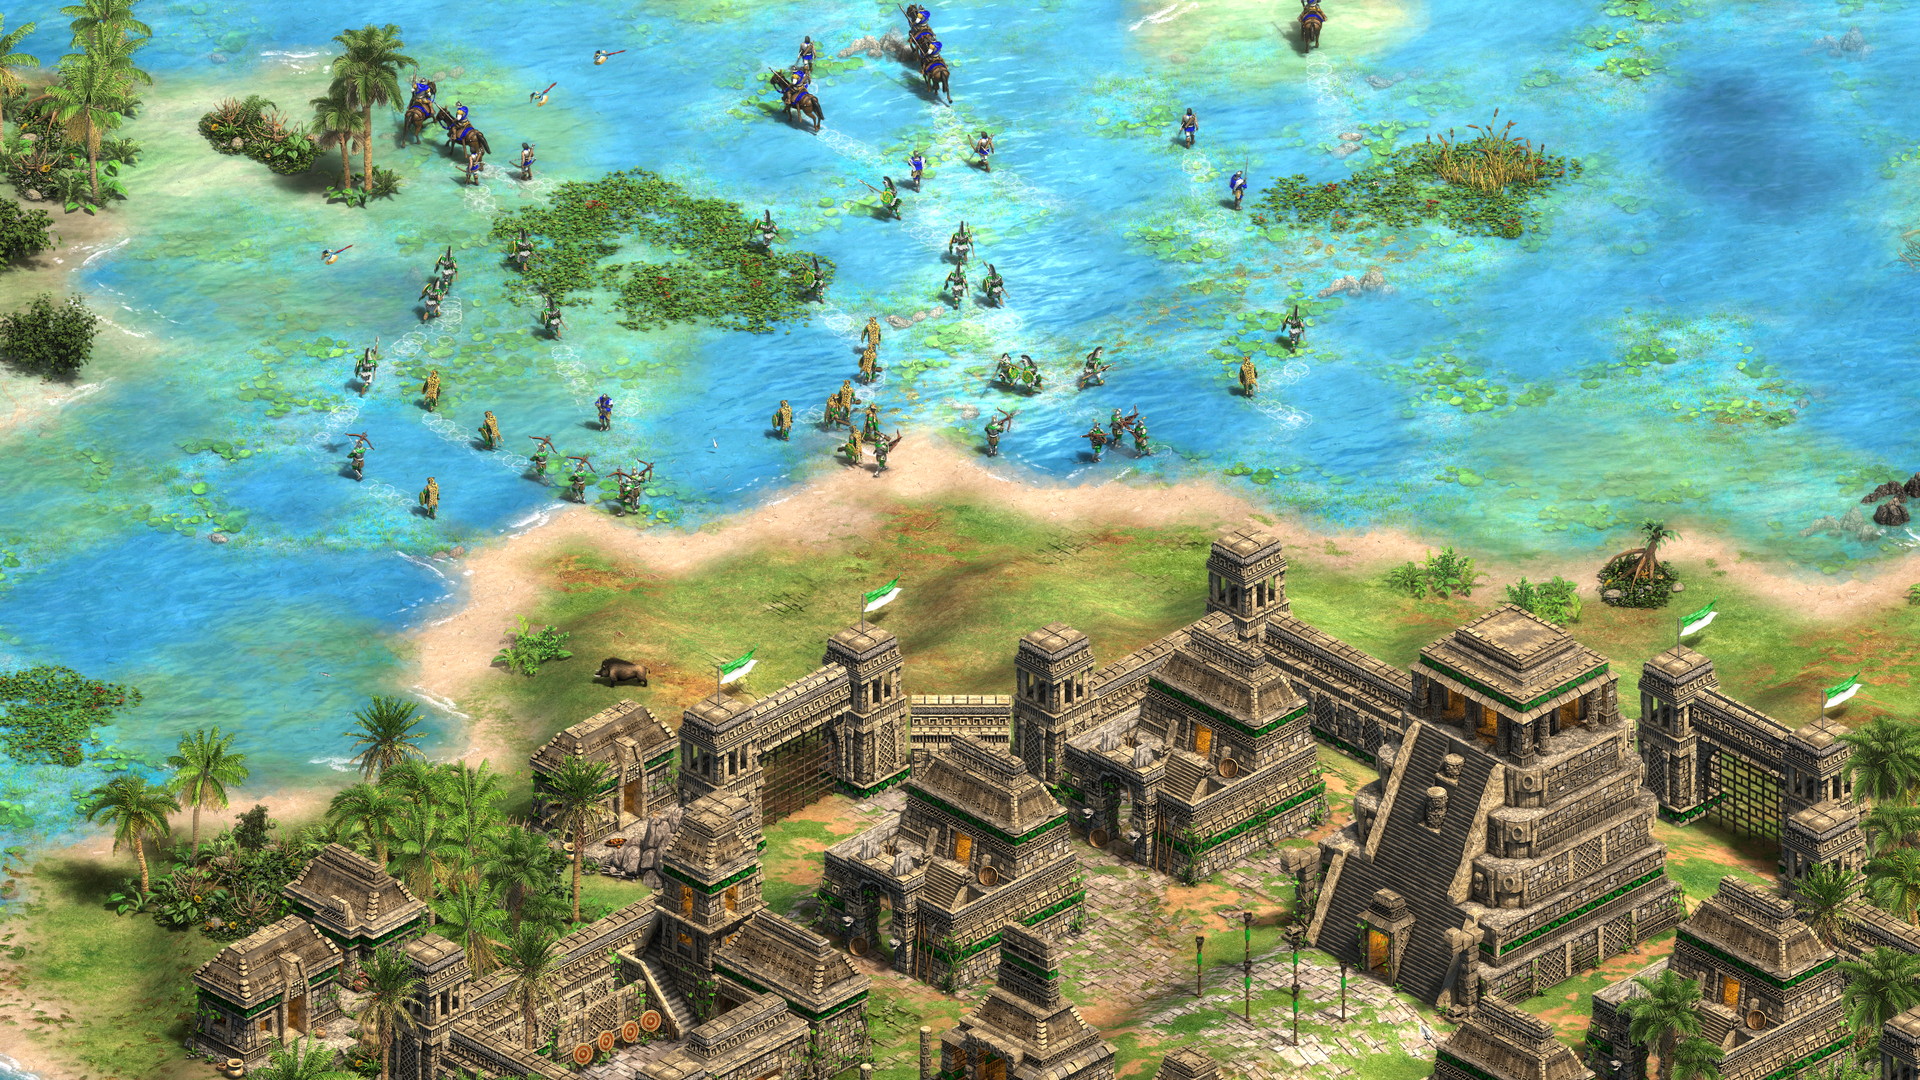 Age of Empires II: Definitive Edition - screenshot 3